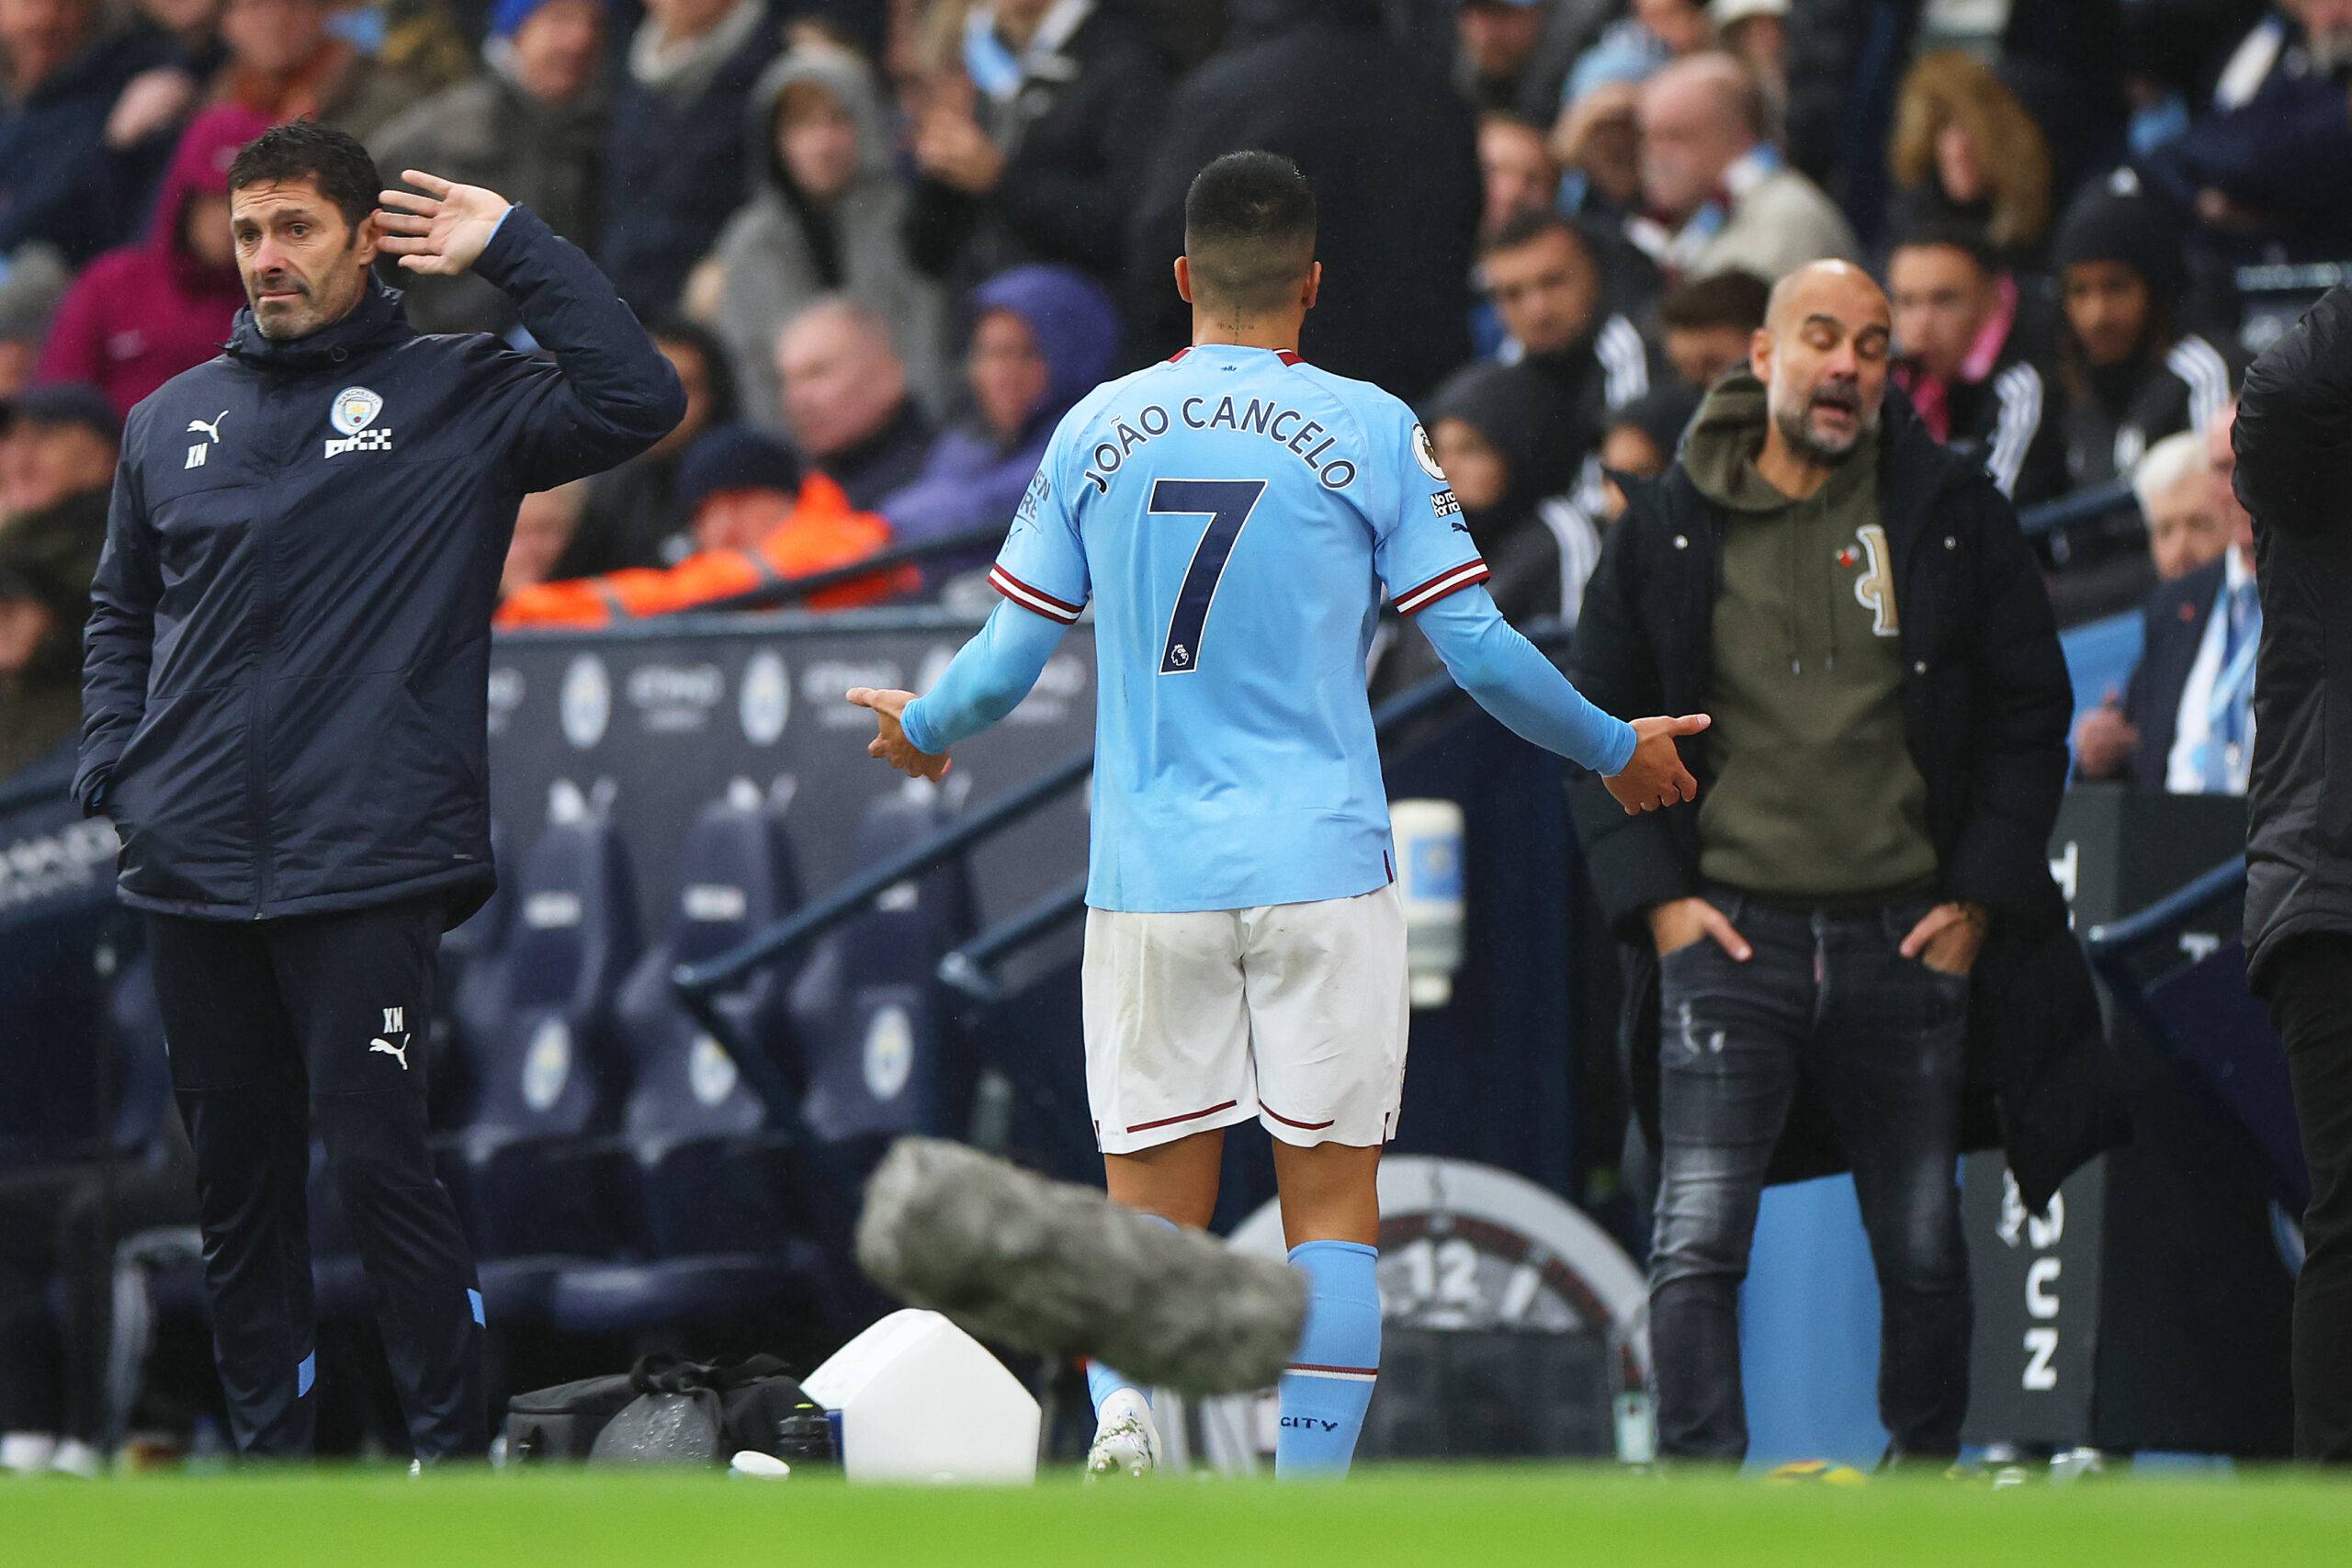 Pain for millions of FPL managers as Man City's Joao Cancelo given straight red card v Fulham